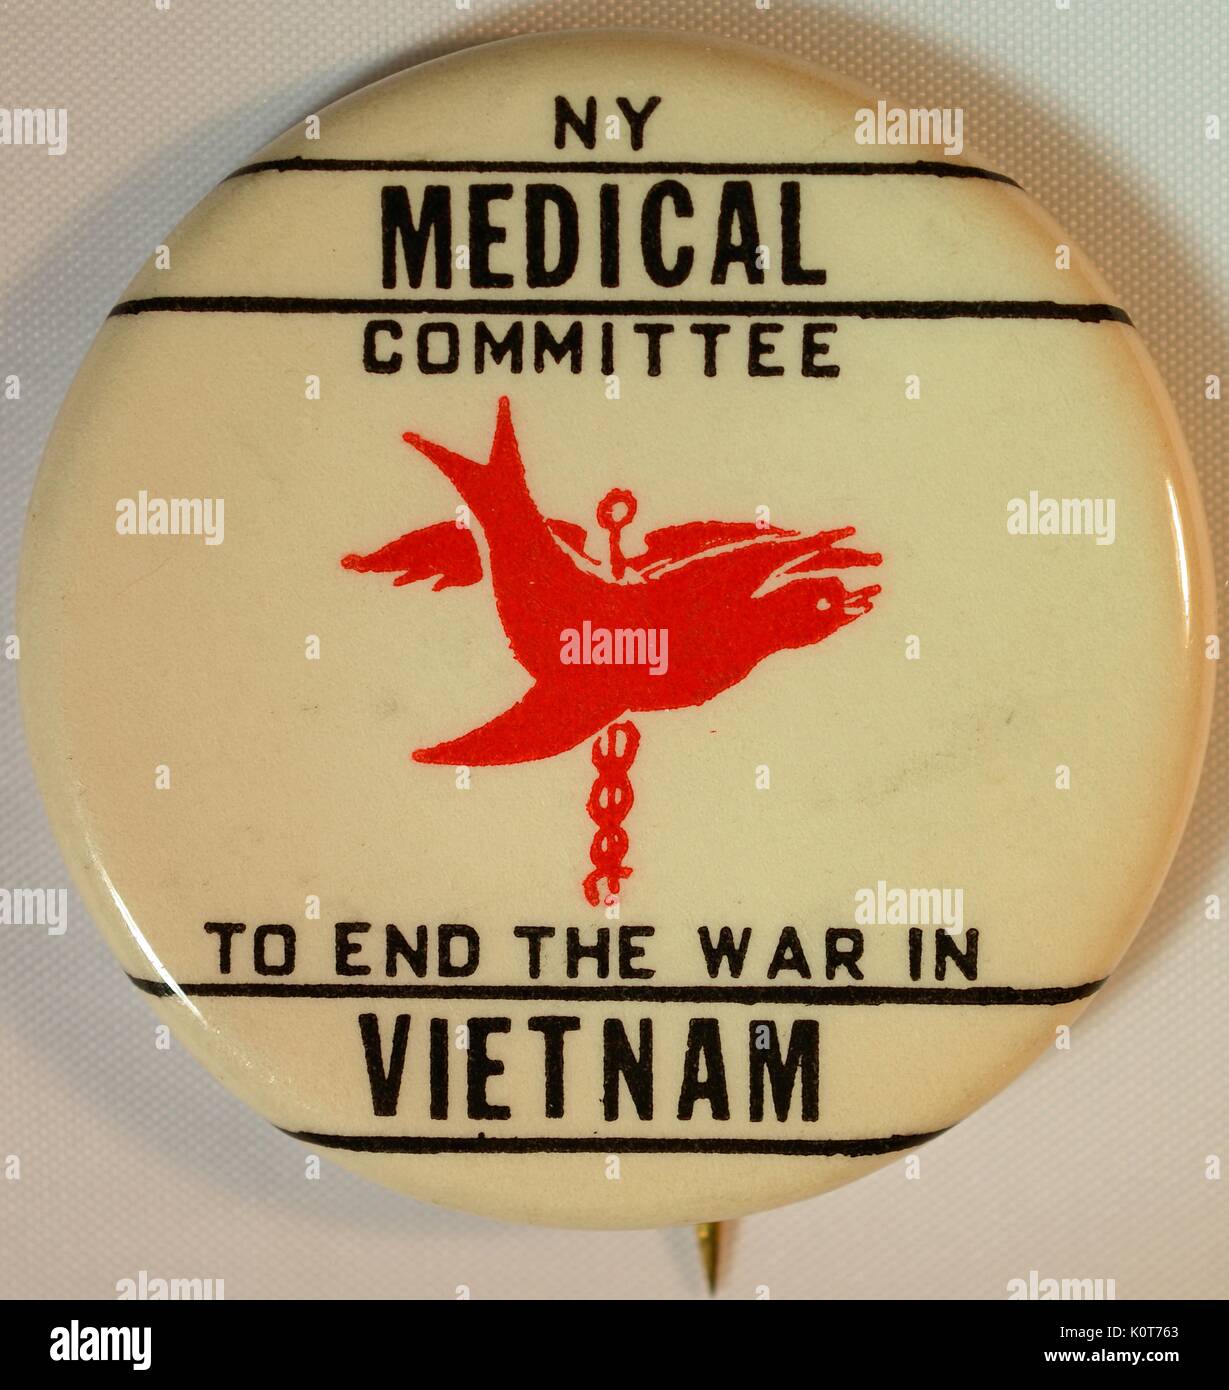 An anti-Vietnam War protest pin created by the New York Medical Committee, it reads 'NY Medical Committee to end the war in Vietnam' and features a symbol of medicine and a dove, 1968. Stock Photo